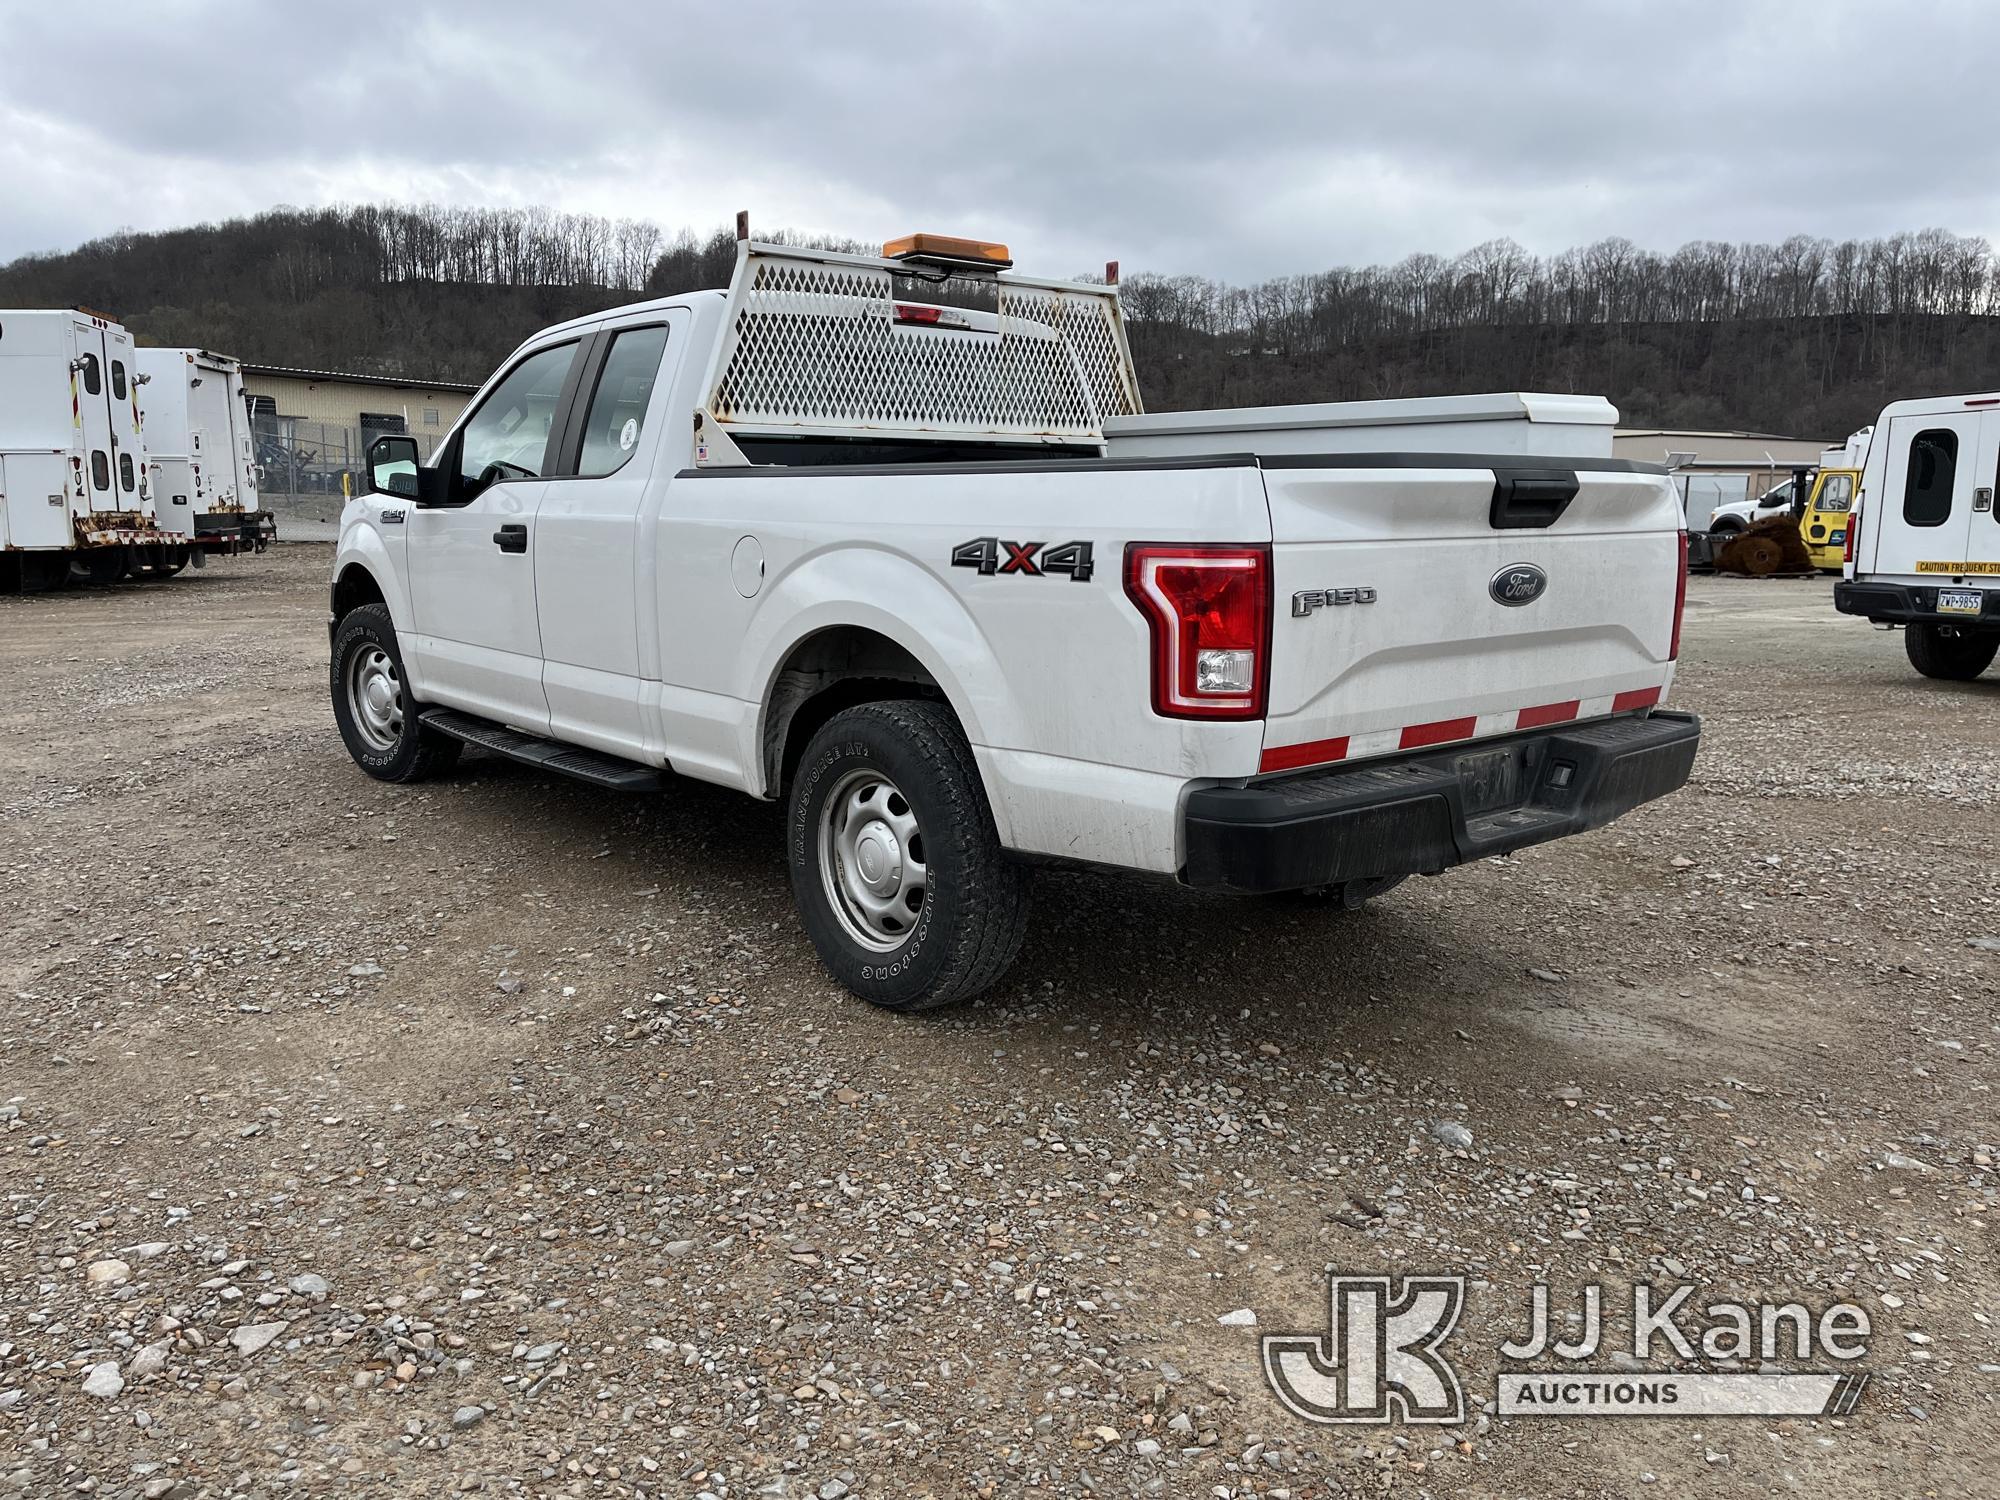 (Smock, PA) 2017 Ford F150 4x4 Extended-Cab Pickup Truck Runs & Moves, Rust Damage